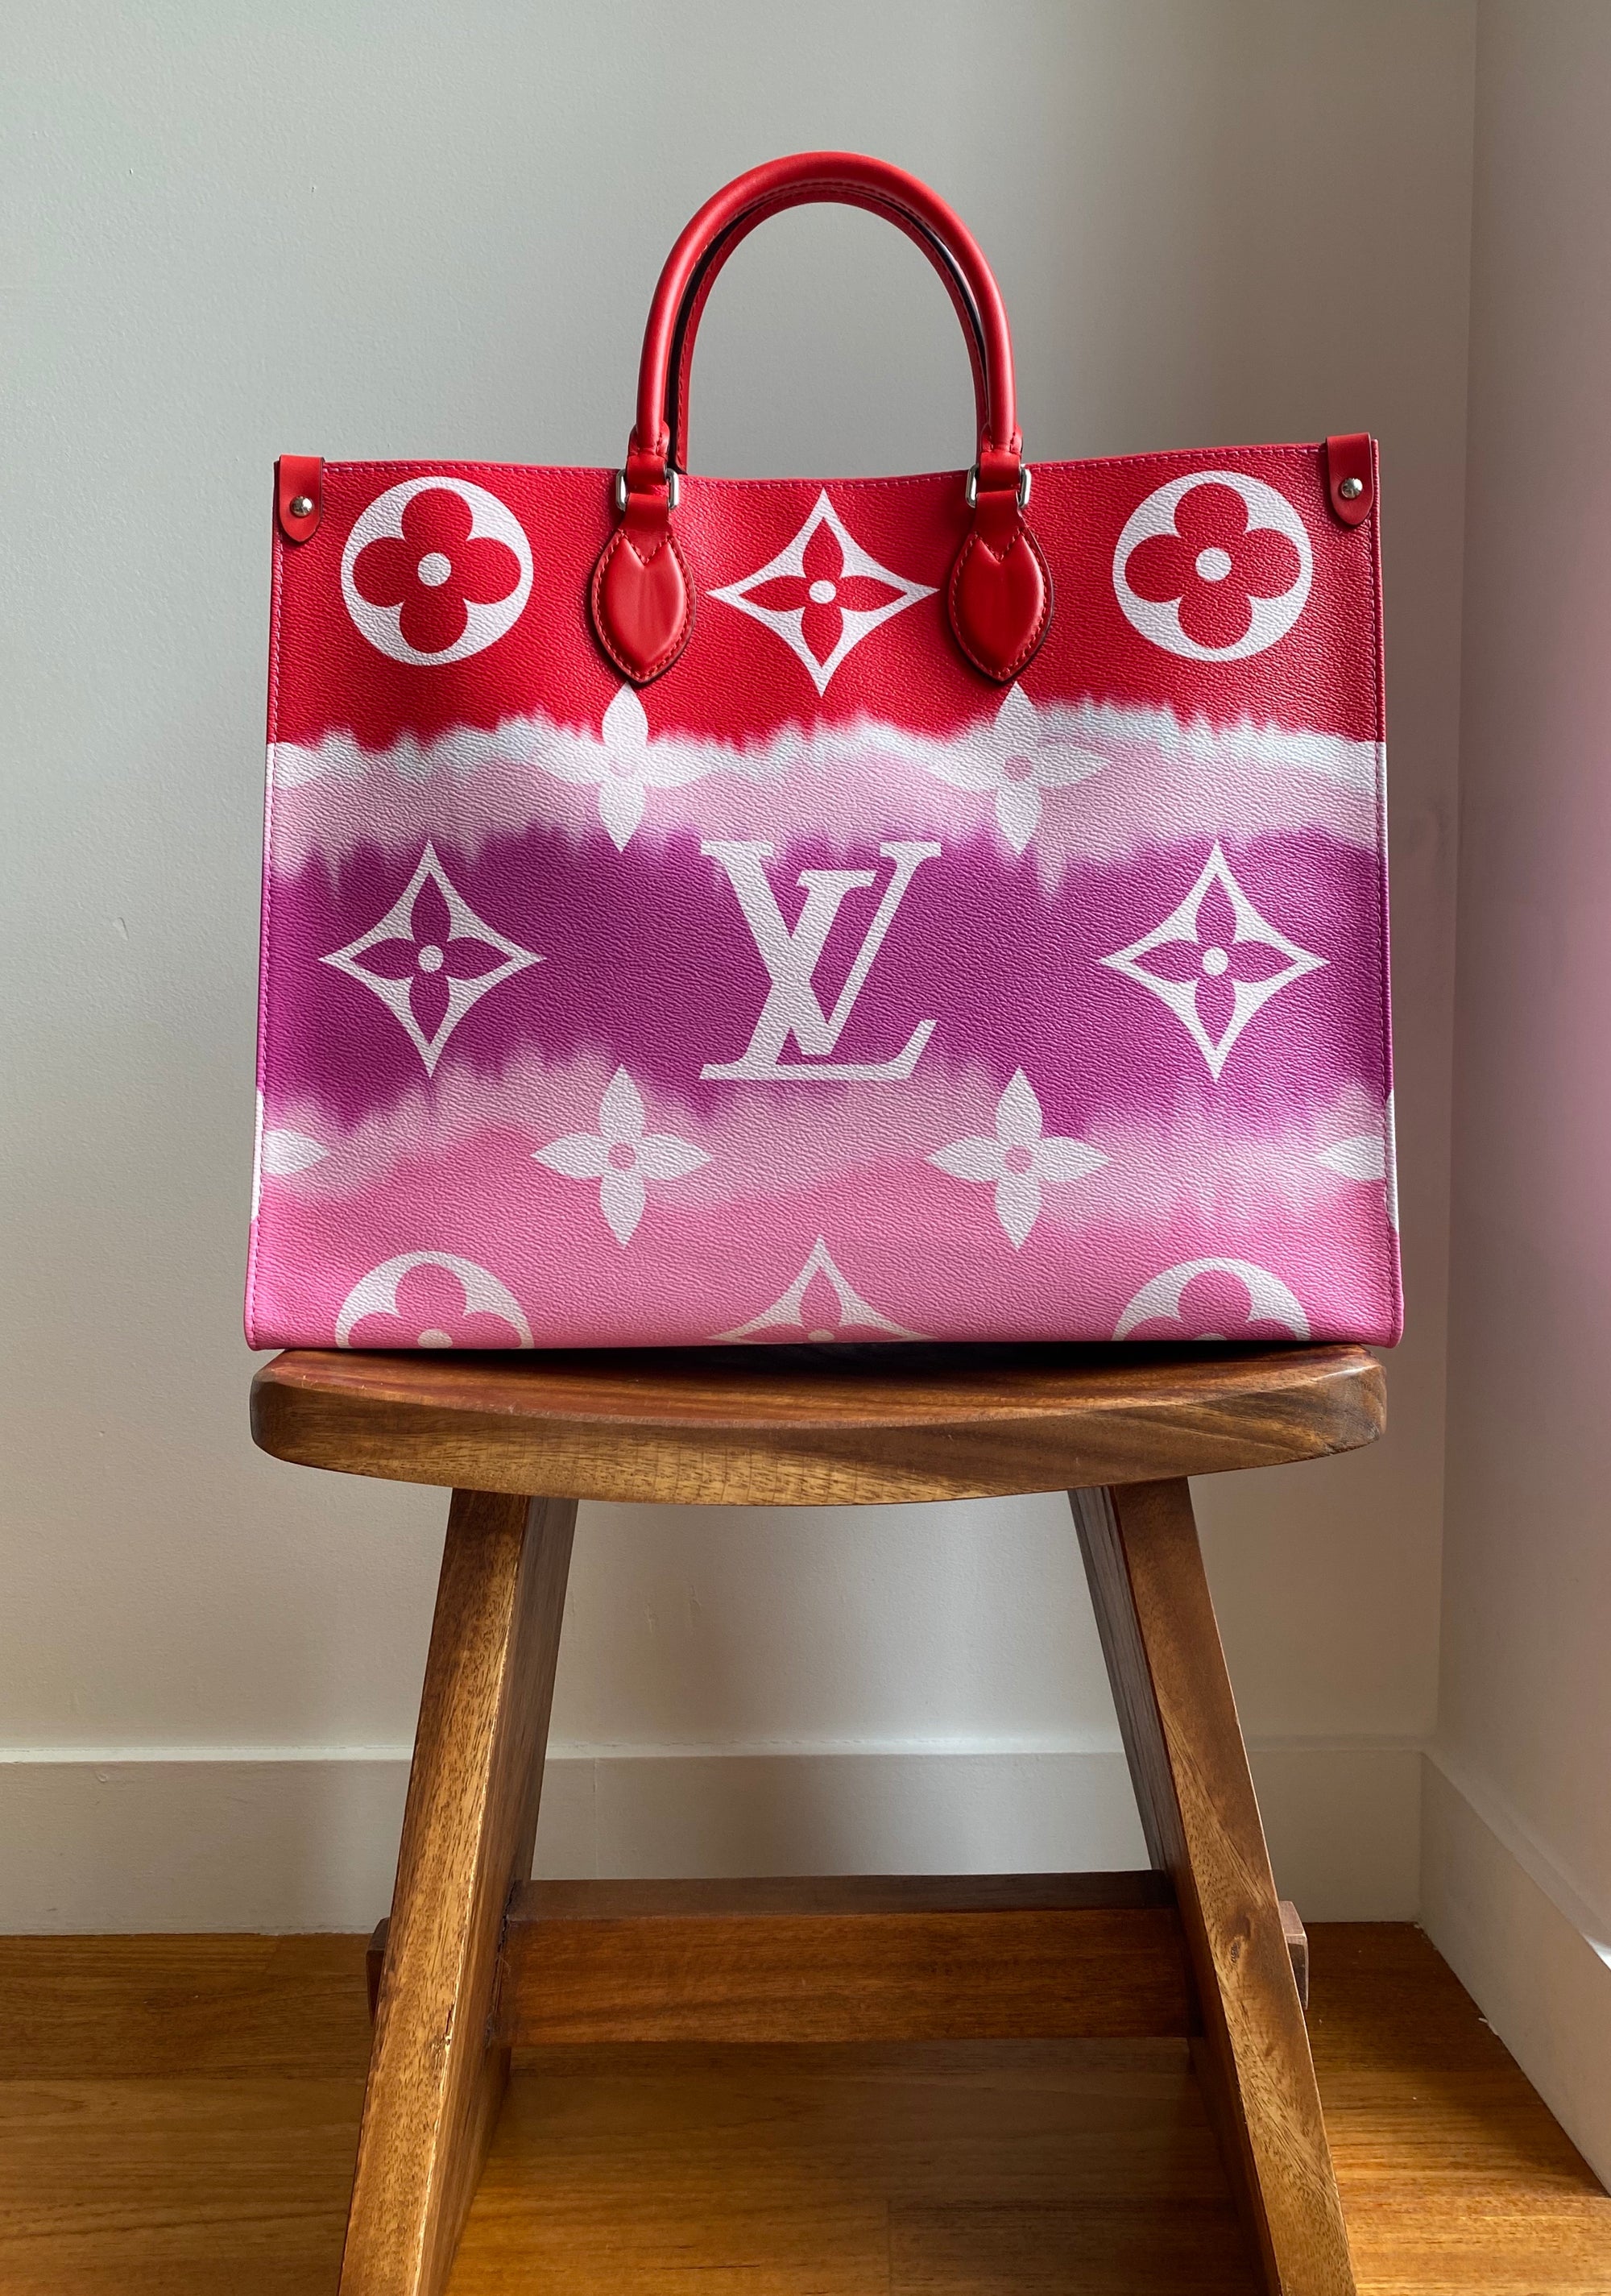 Louis Vuitton Escale Onthego GM Tote Bag M45119 Pastel Monogram From Japan  New